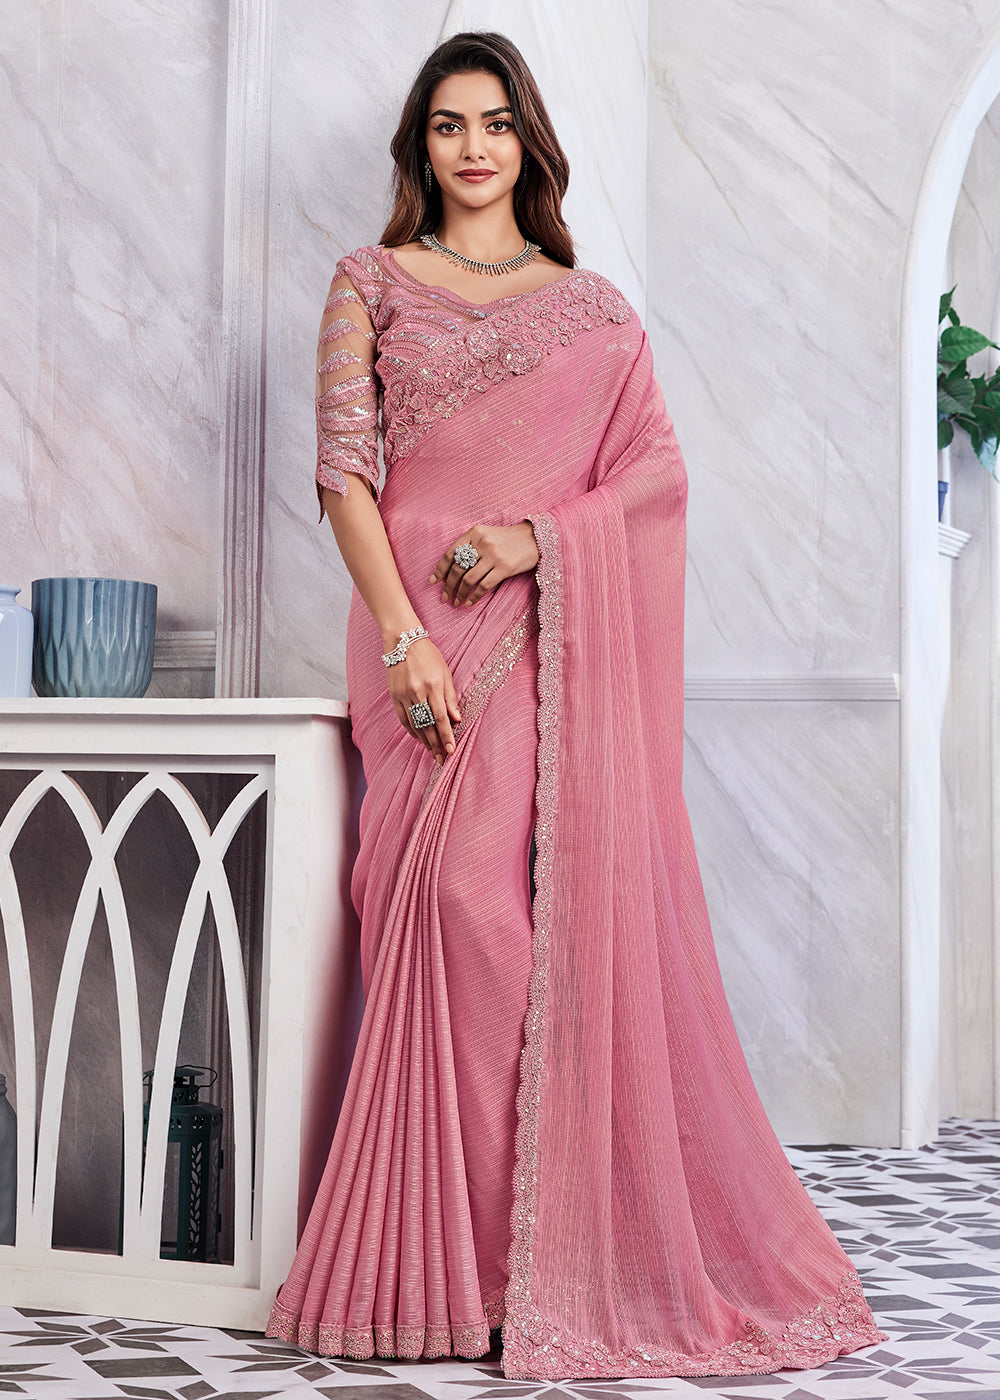 Buy Now Lovely Blush Pink Silk Embroidered Designer Saree Online in USA, UK, Canada & Worldwide at Empress Clothing.